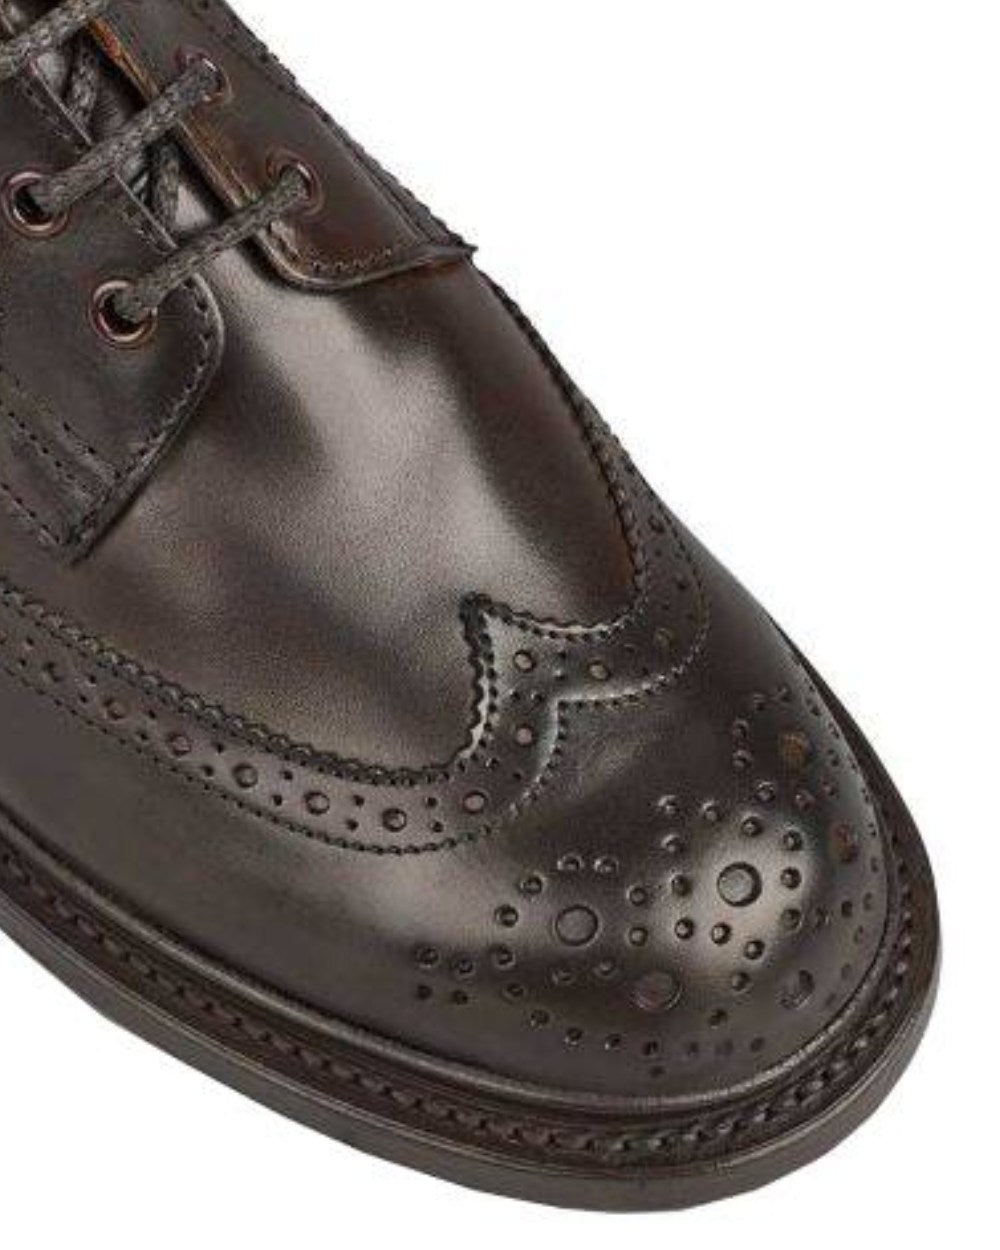 Espresso Burnished Coloured Trickers Stephy Brogue Boot On A White Background 